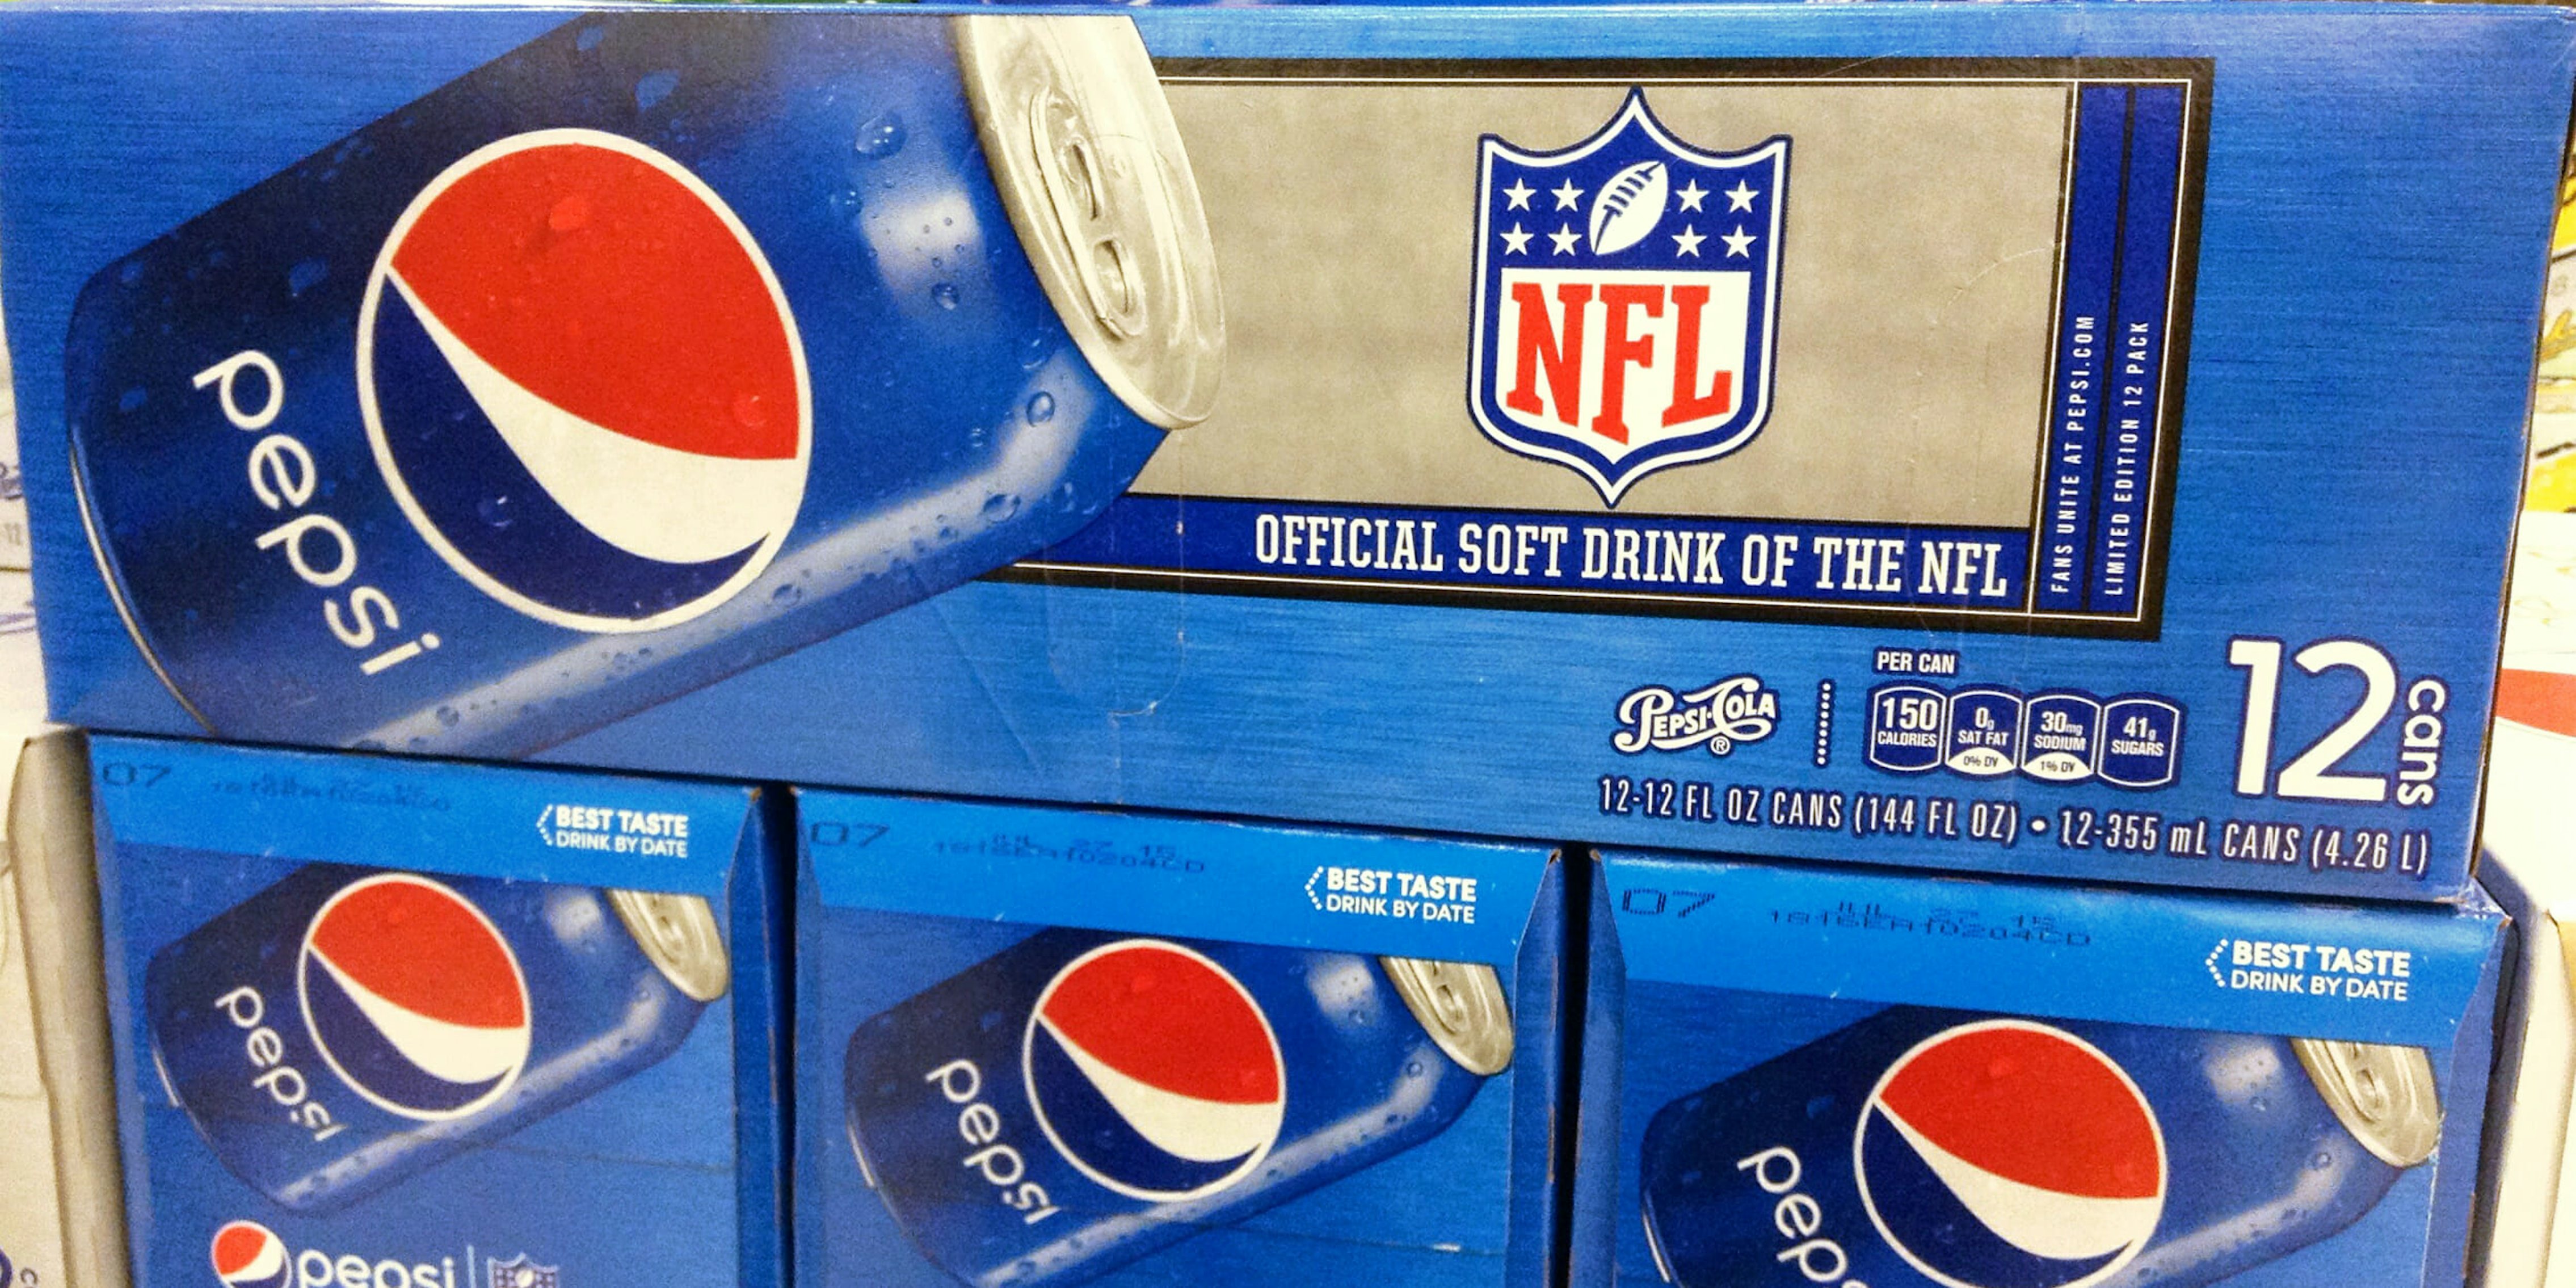 pepsi official drink of the nfl